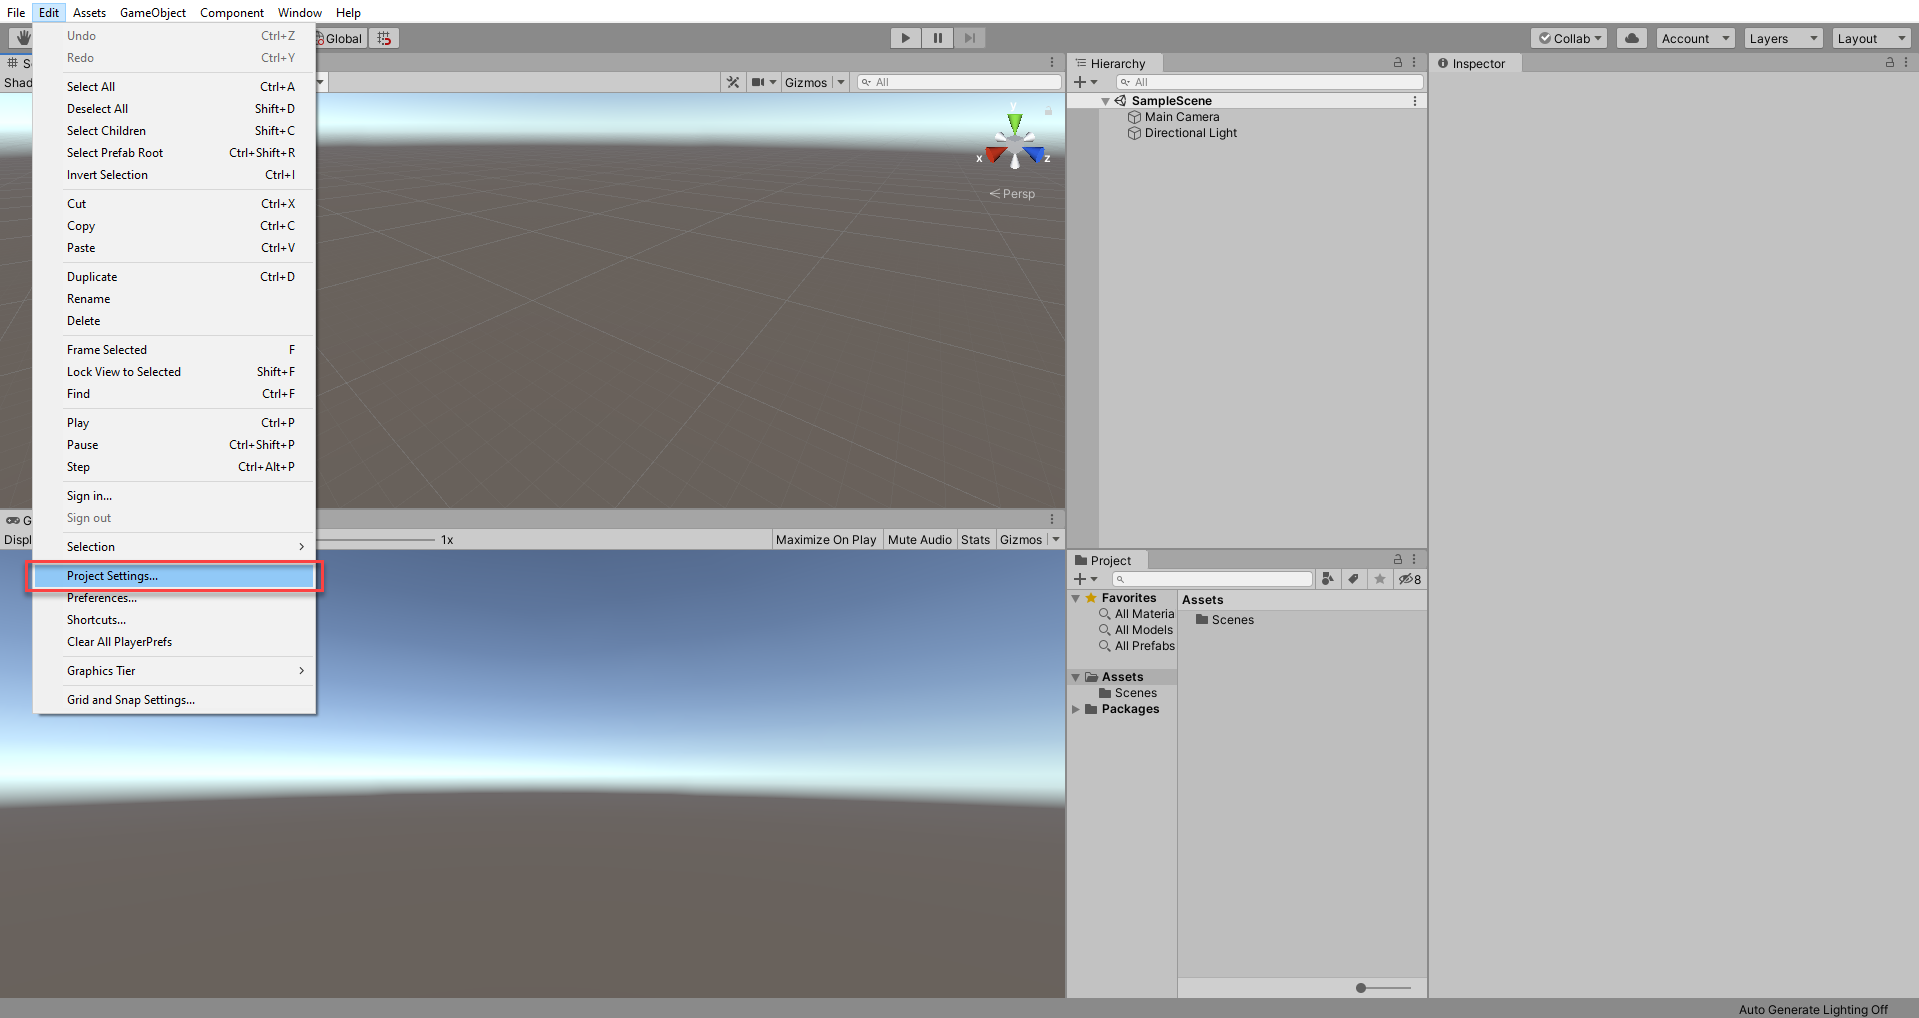 Screenshot of Unity editor with Edit menu expanded and Project Settings highlighted.